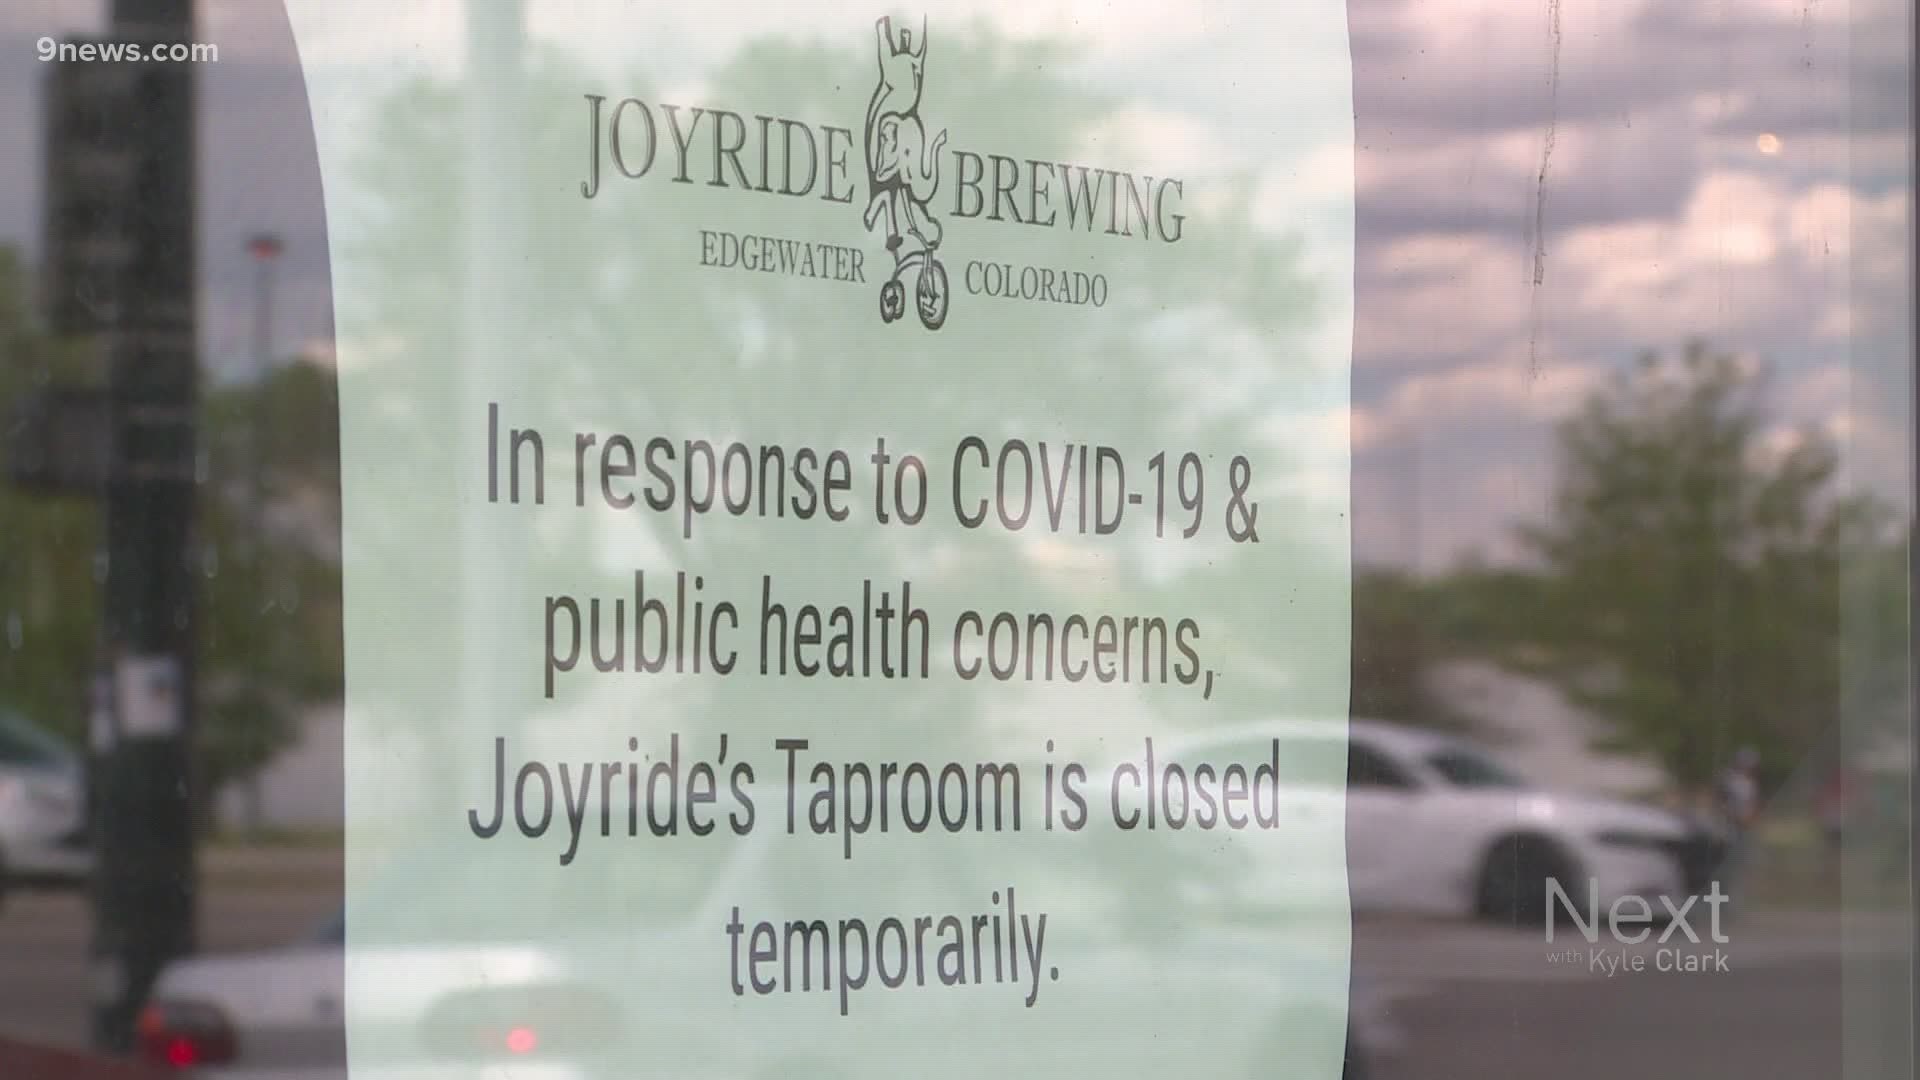 Breweries will have to get creative to allow on-site drinking. Gov. Polis said they could open, but with food trucks or with restaurant partnerships.